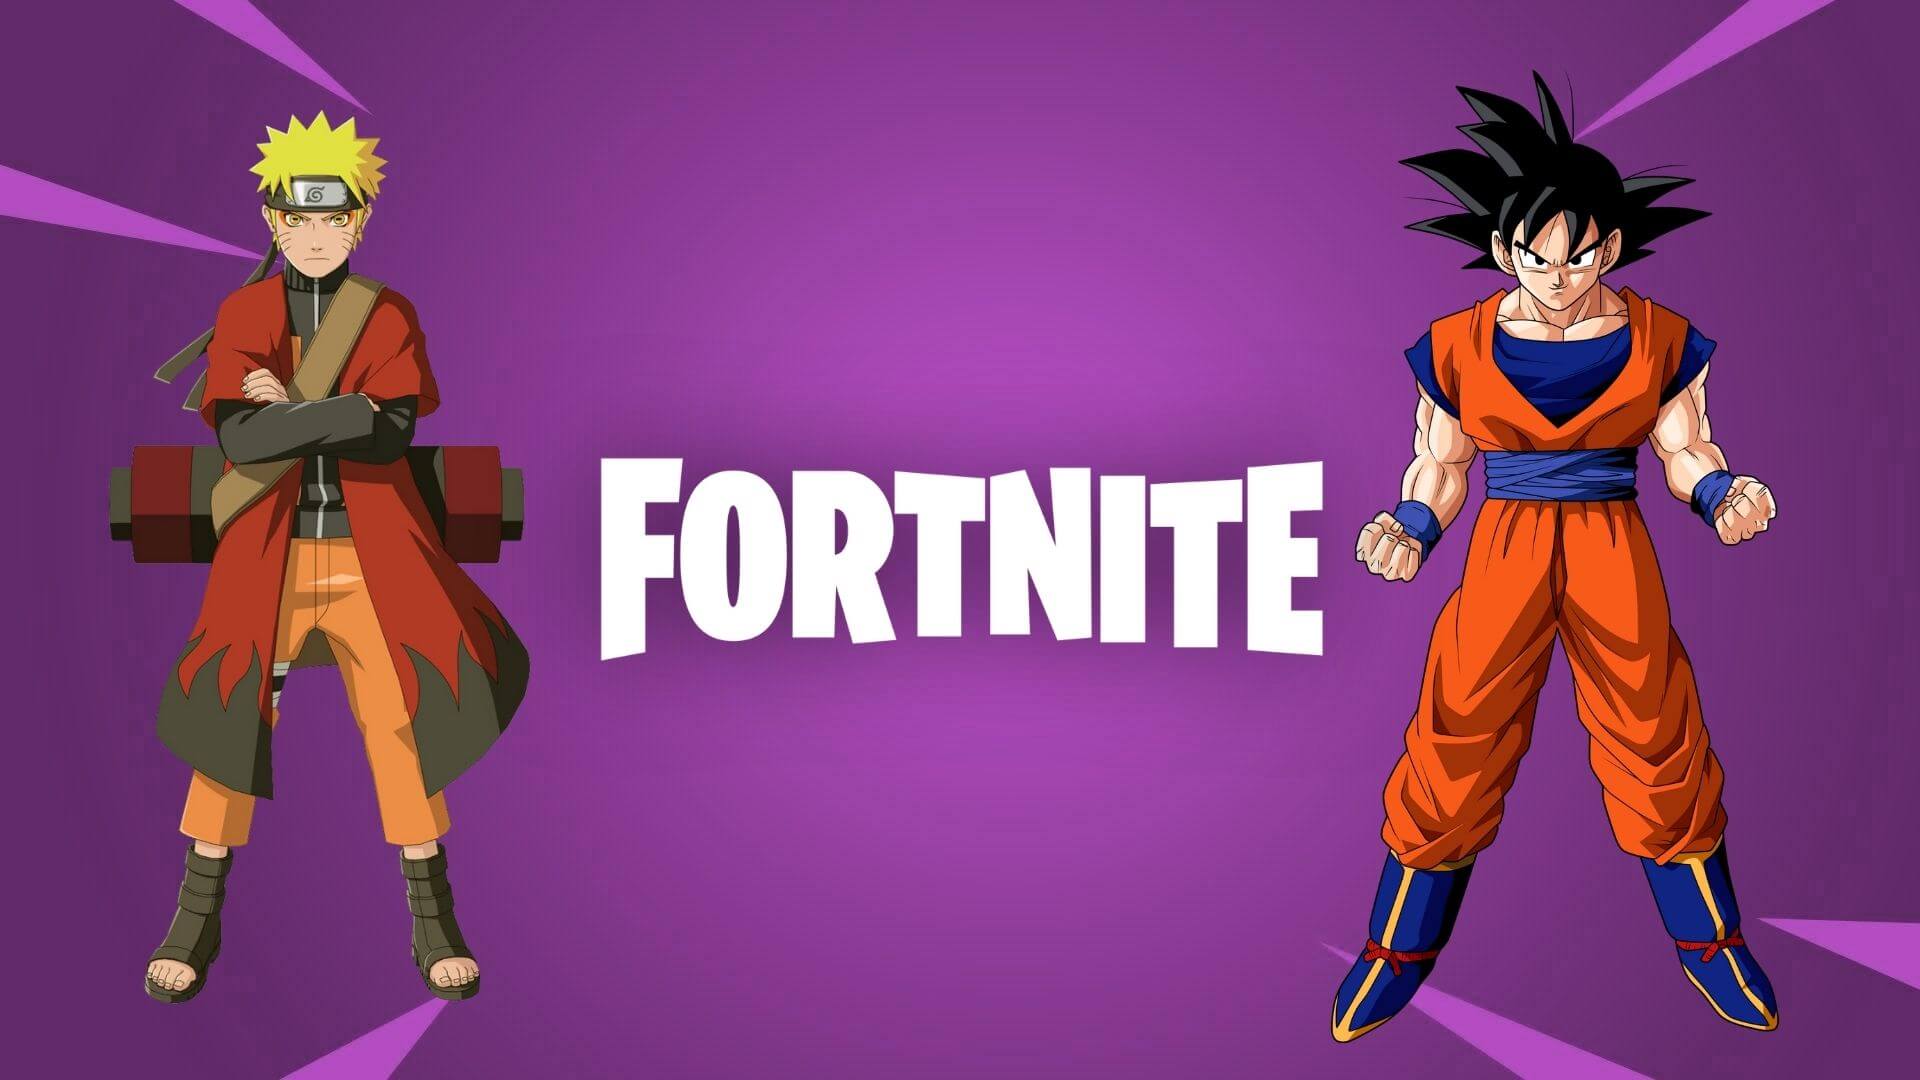 Fortnite leaker claims Naruto & Dragon Ball crossovers could be coming soon